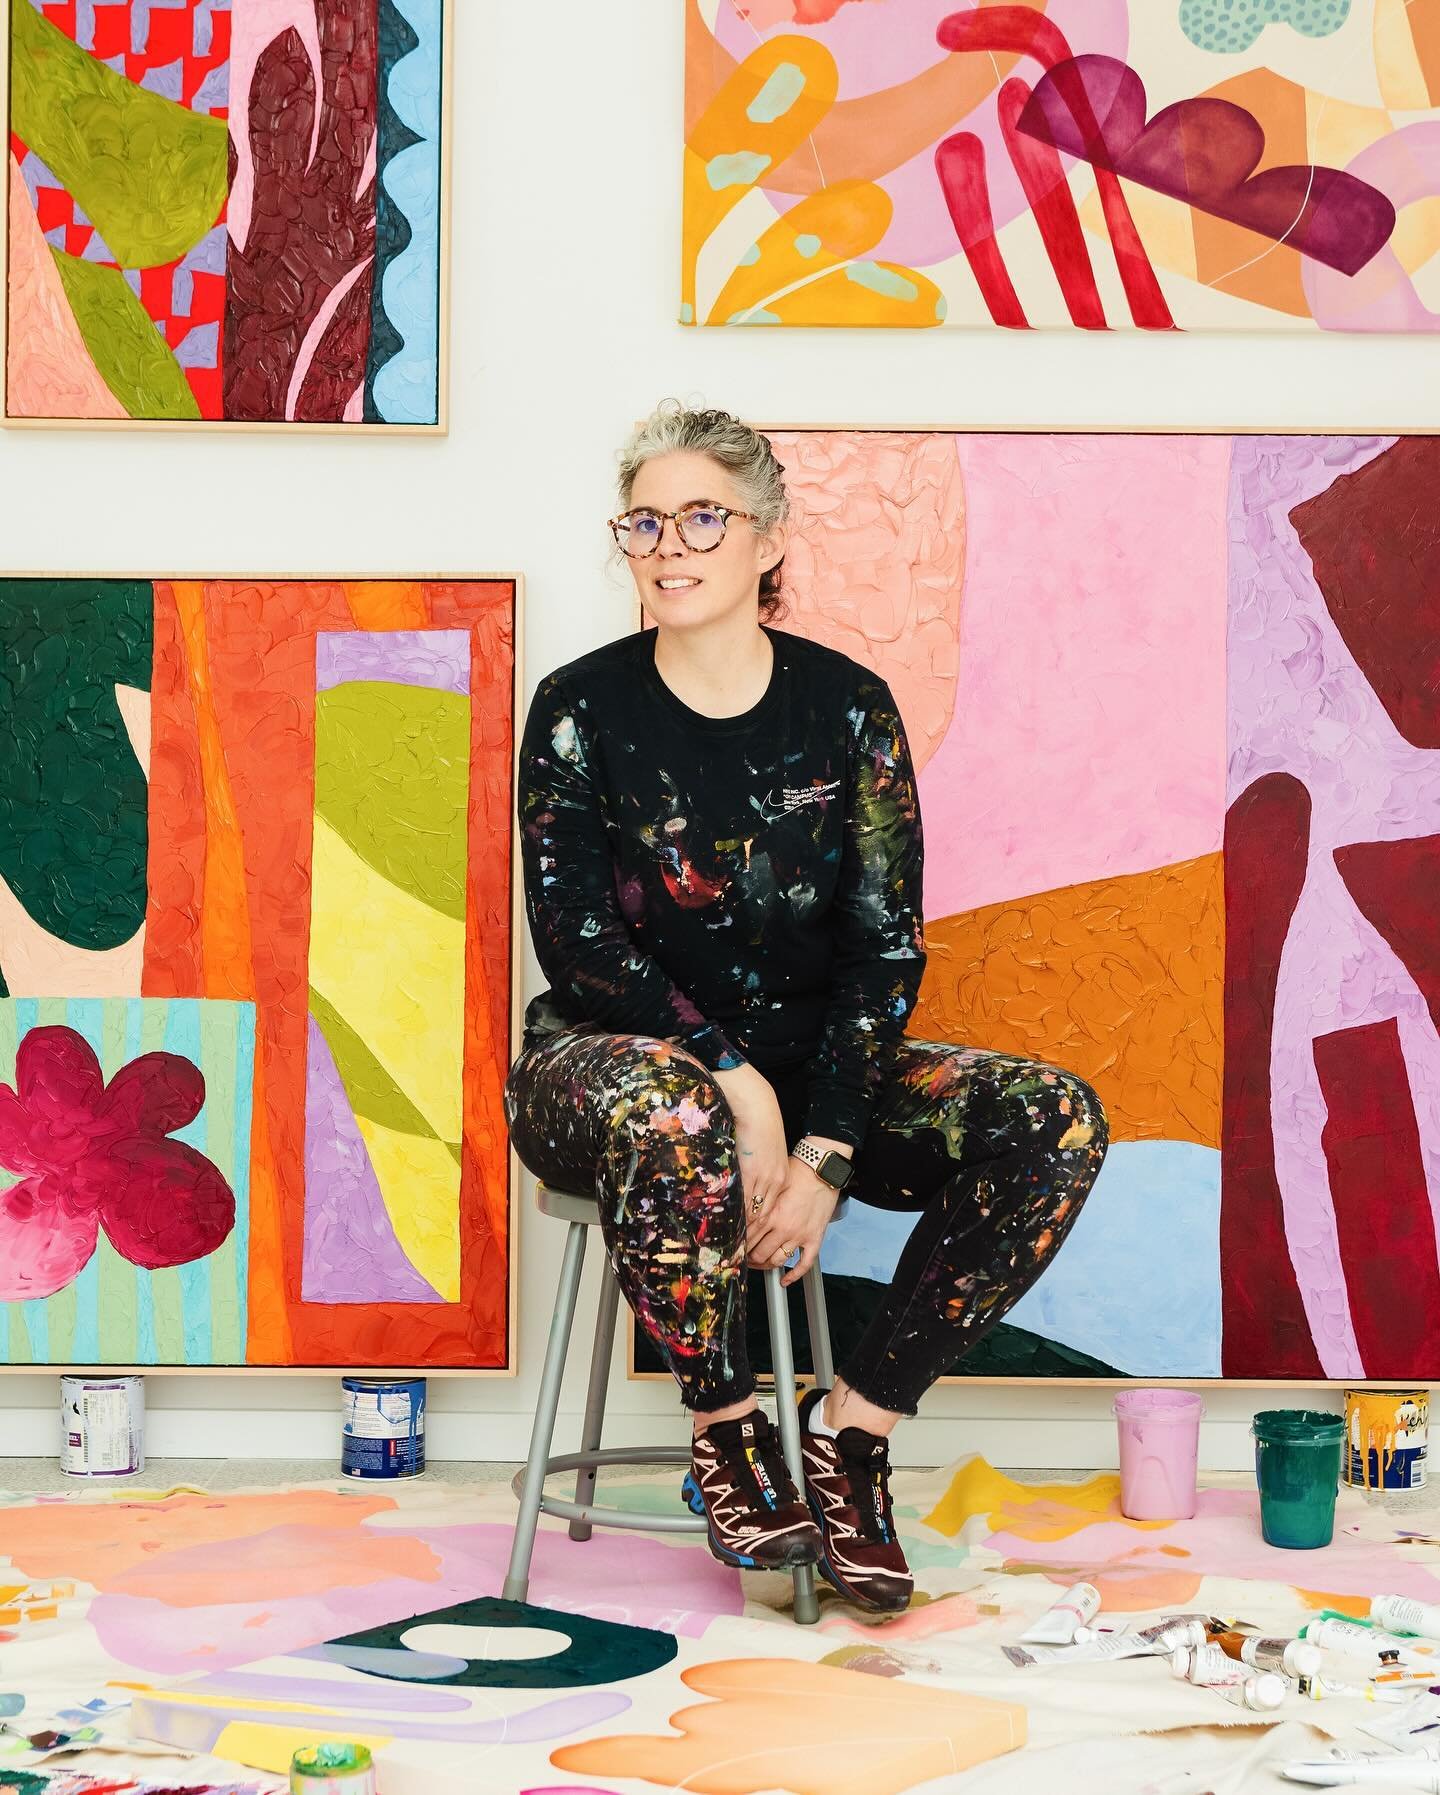 Multidisciplinary artist Alex Proba&rsquo;s ( @alexproba ) new body of work, &lsquo;The Whispers Inside&rsquo; at @uprisenyc in New York, draws inspiration from the influence of her grandmother&mdash;the paintings full of vibrant colour and boundless